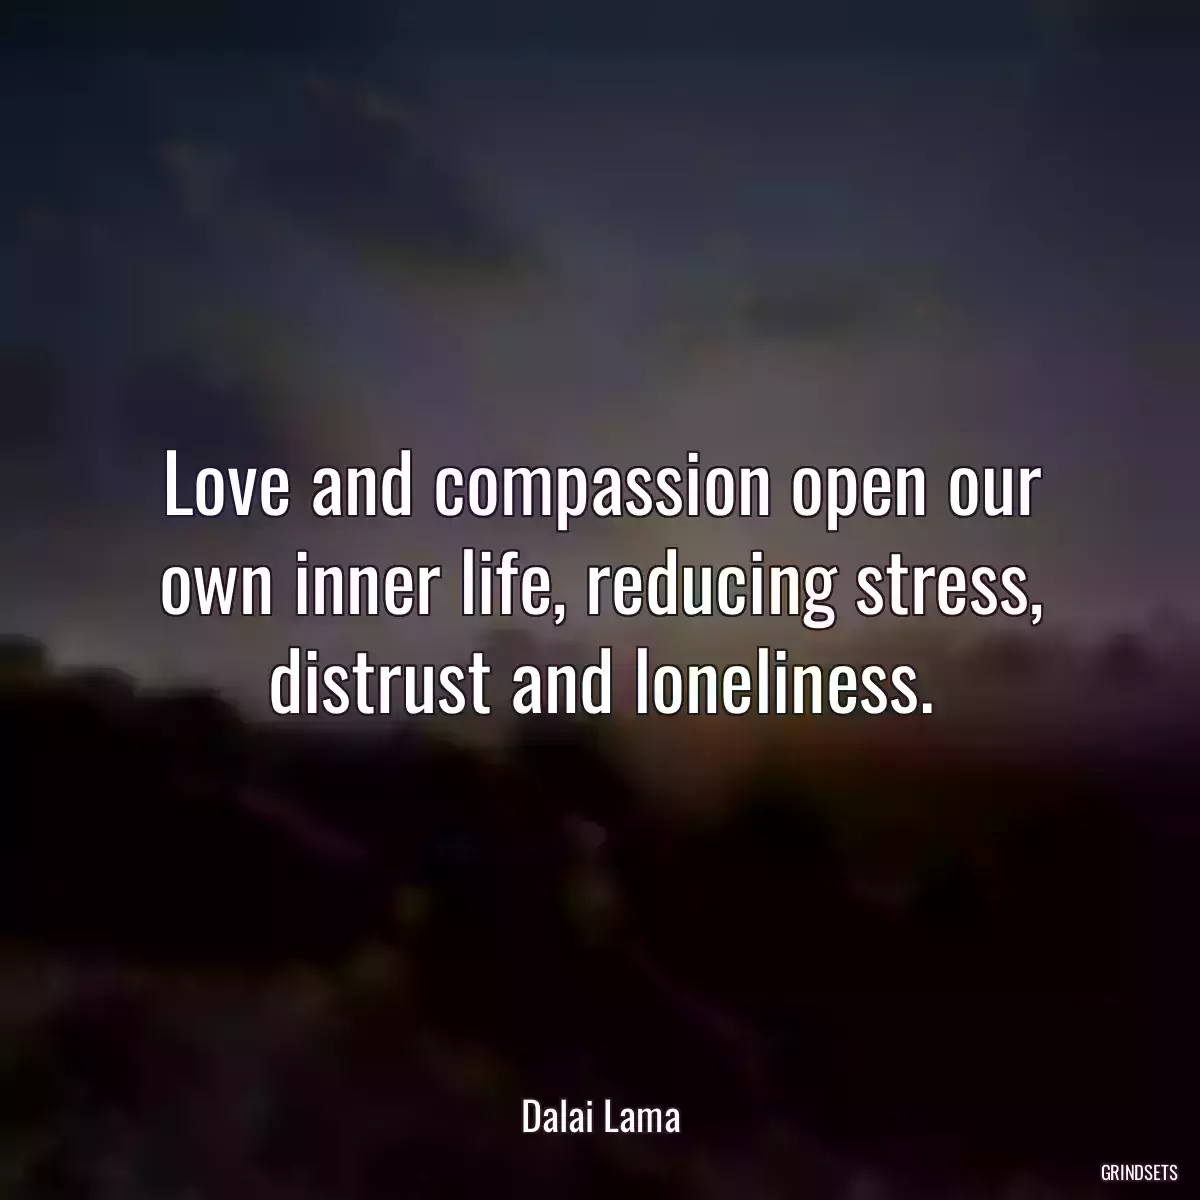 Love and compassion open our own inner life, reducing stress, distrust and loneliness.